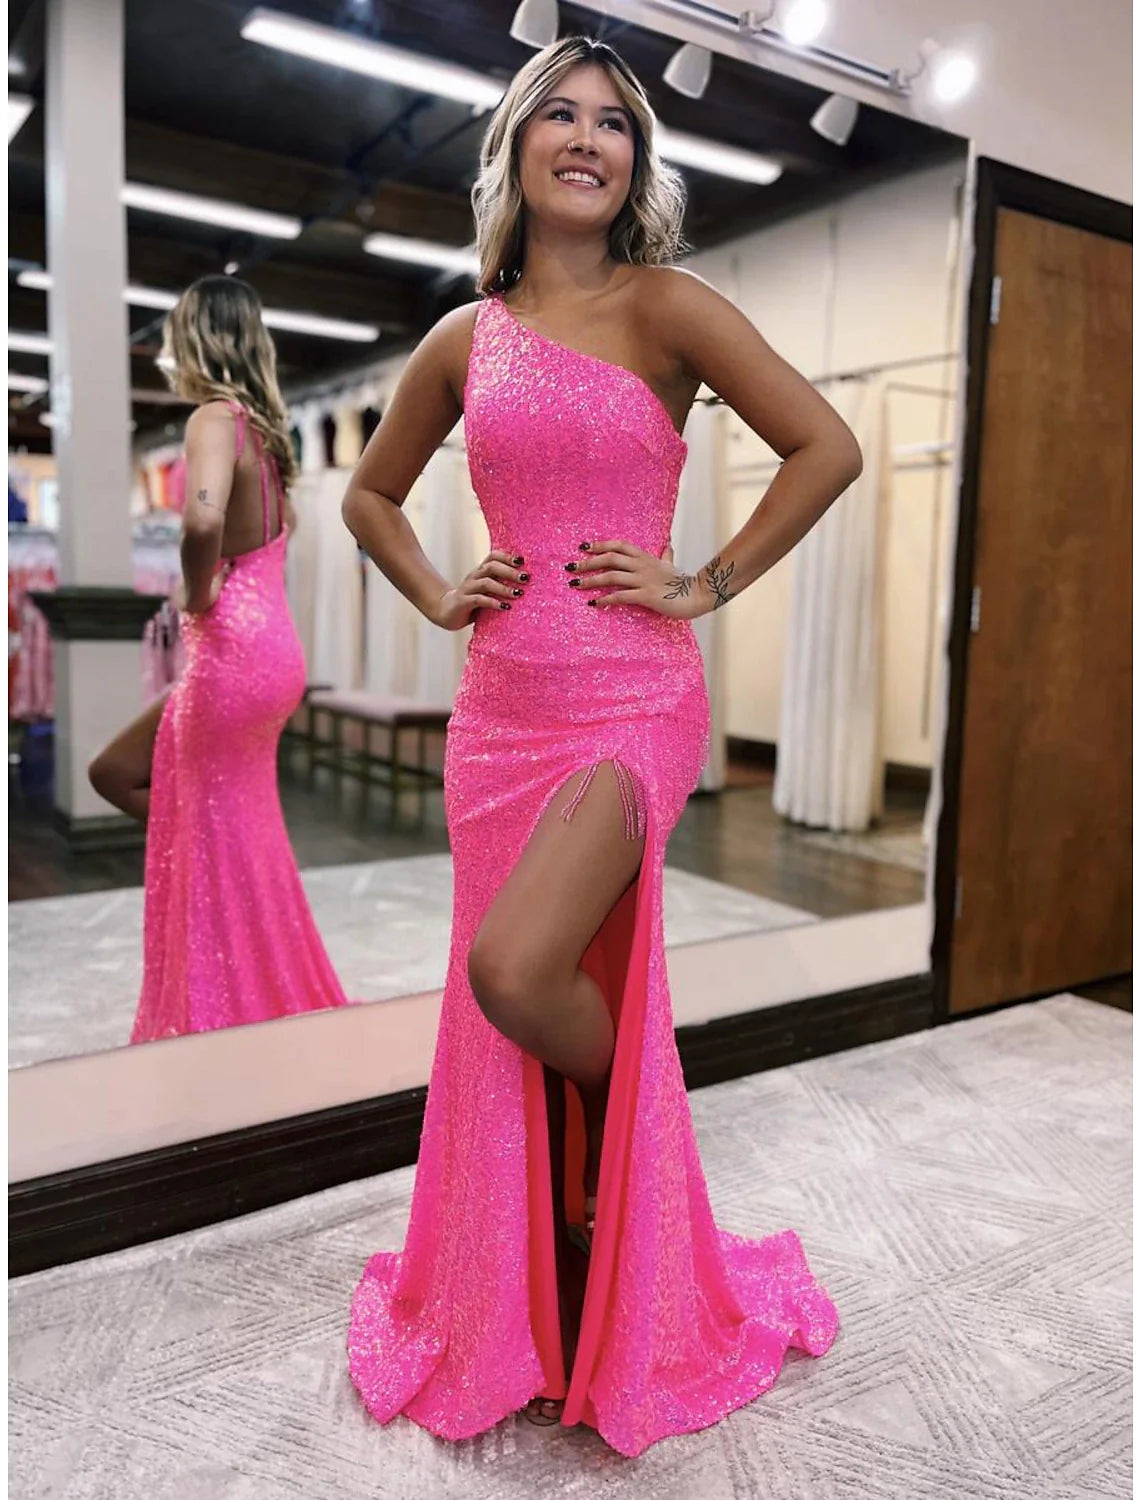 Mermaid / Trumpet Prom Dresses Sexy Dress Formal Sweep / Brush Train Sleeveless One Shoulder Sequined Backless with Sequin Slit